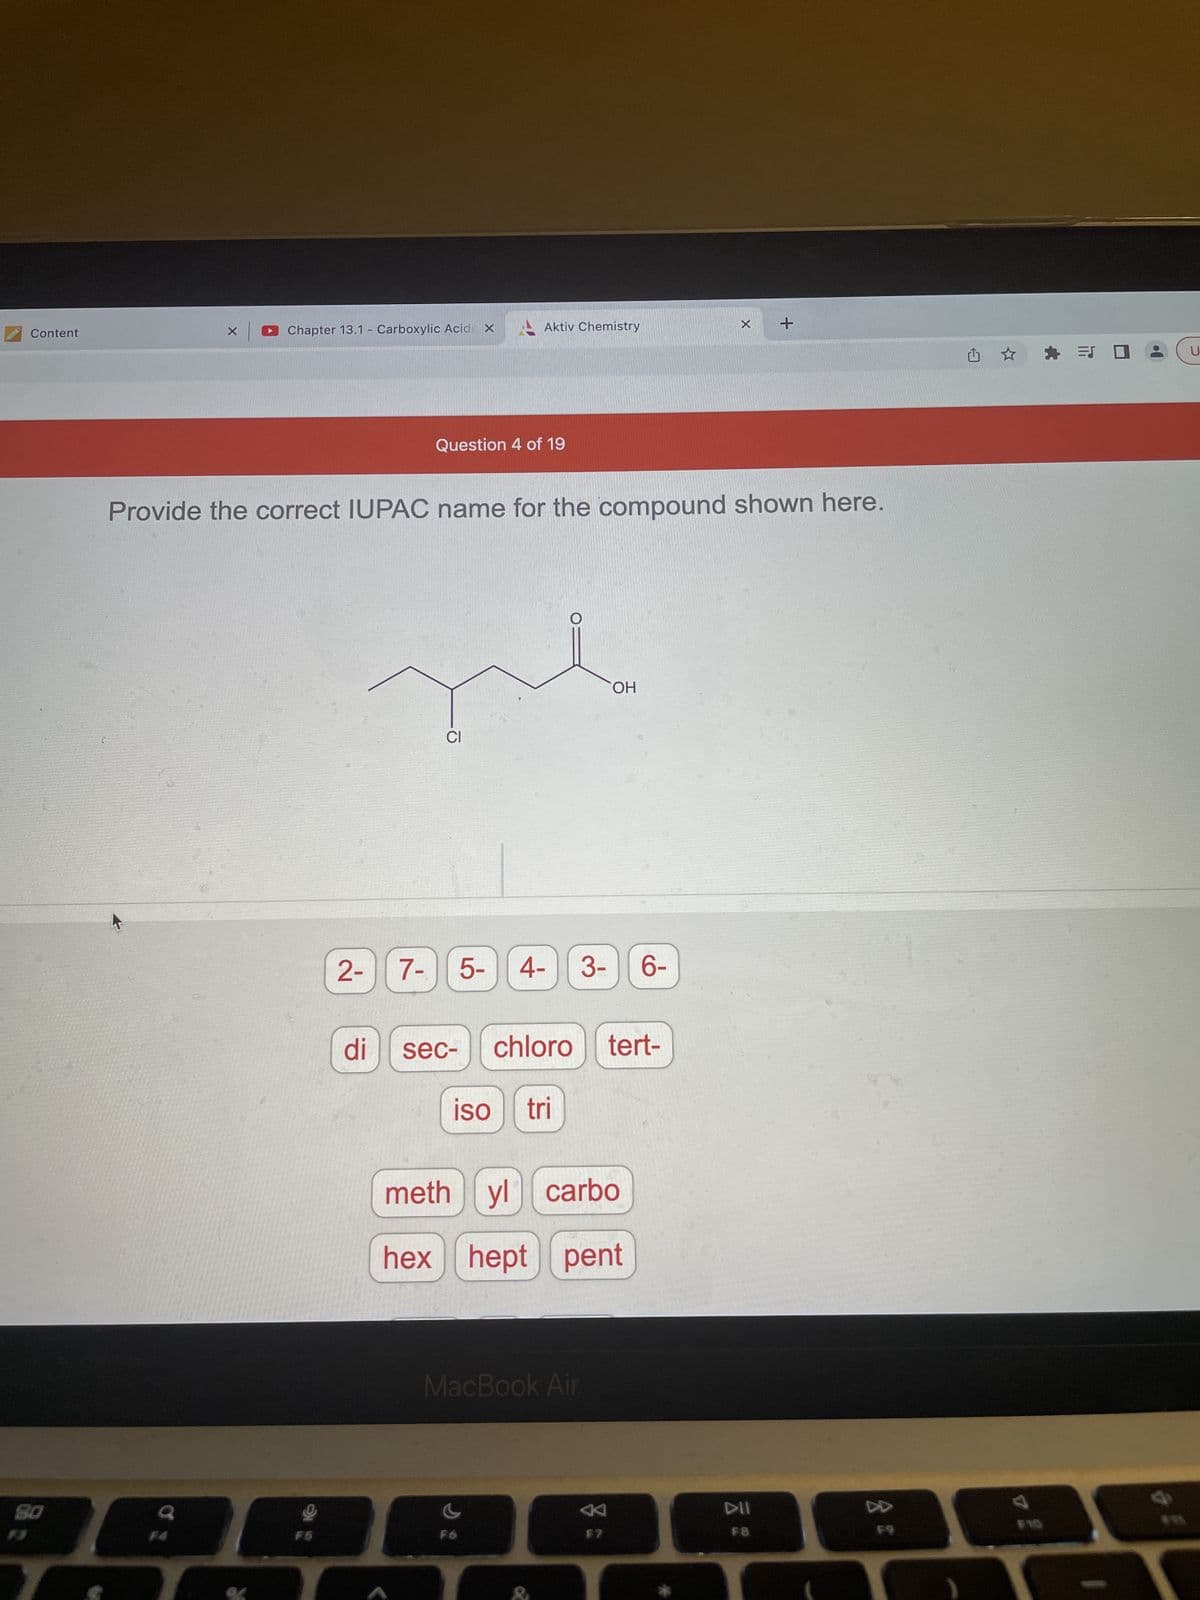 Chapter 13.1 - Carboxylic Acid
X
+
Content
X
Question 4 of 19
Provide the correct IUPAC name for the compound shown here.
OH
CI
€
5- 4- 3- 6-
chloro tert-
80
F5
2- 7-
di
sec-
Aktiv Chemistry
iso tri
methyl carbo
hex hept pent
MacBook Air
F7
DII
F8
F9
* =
ES
GE
U